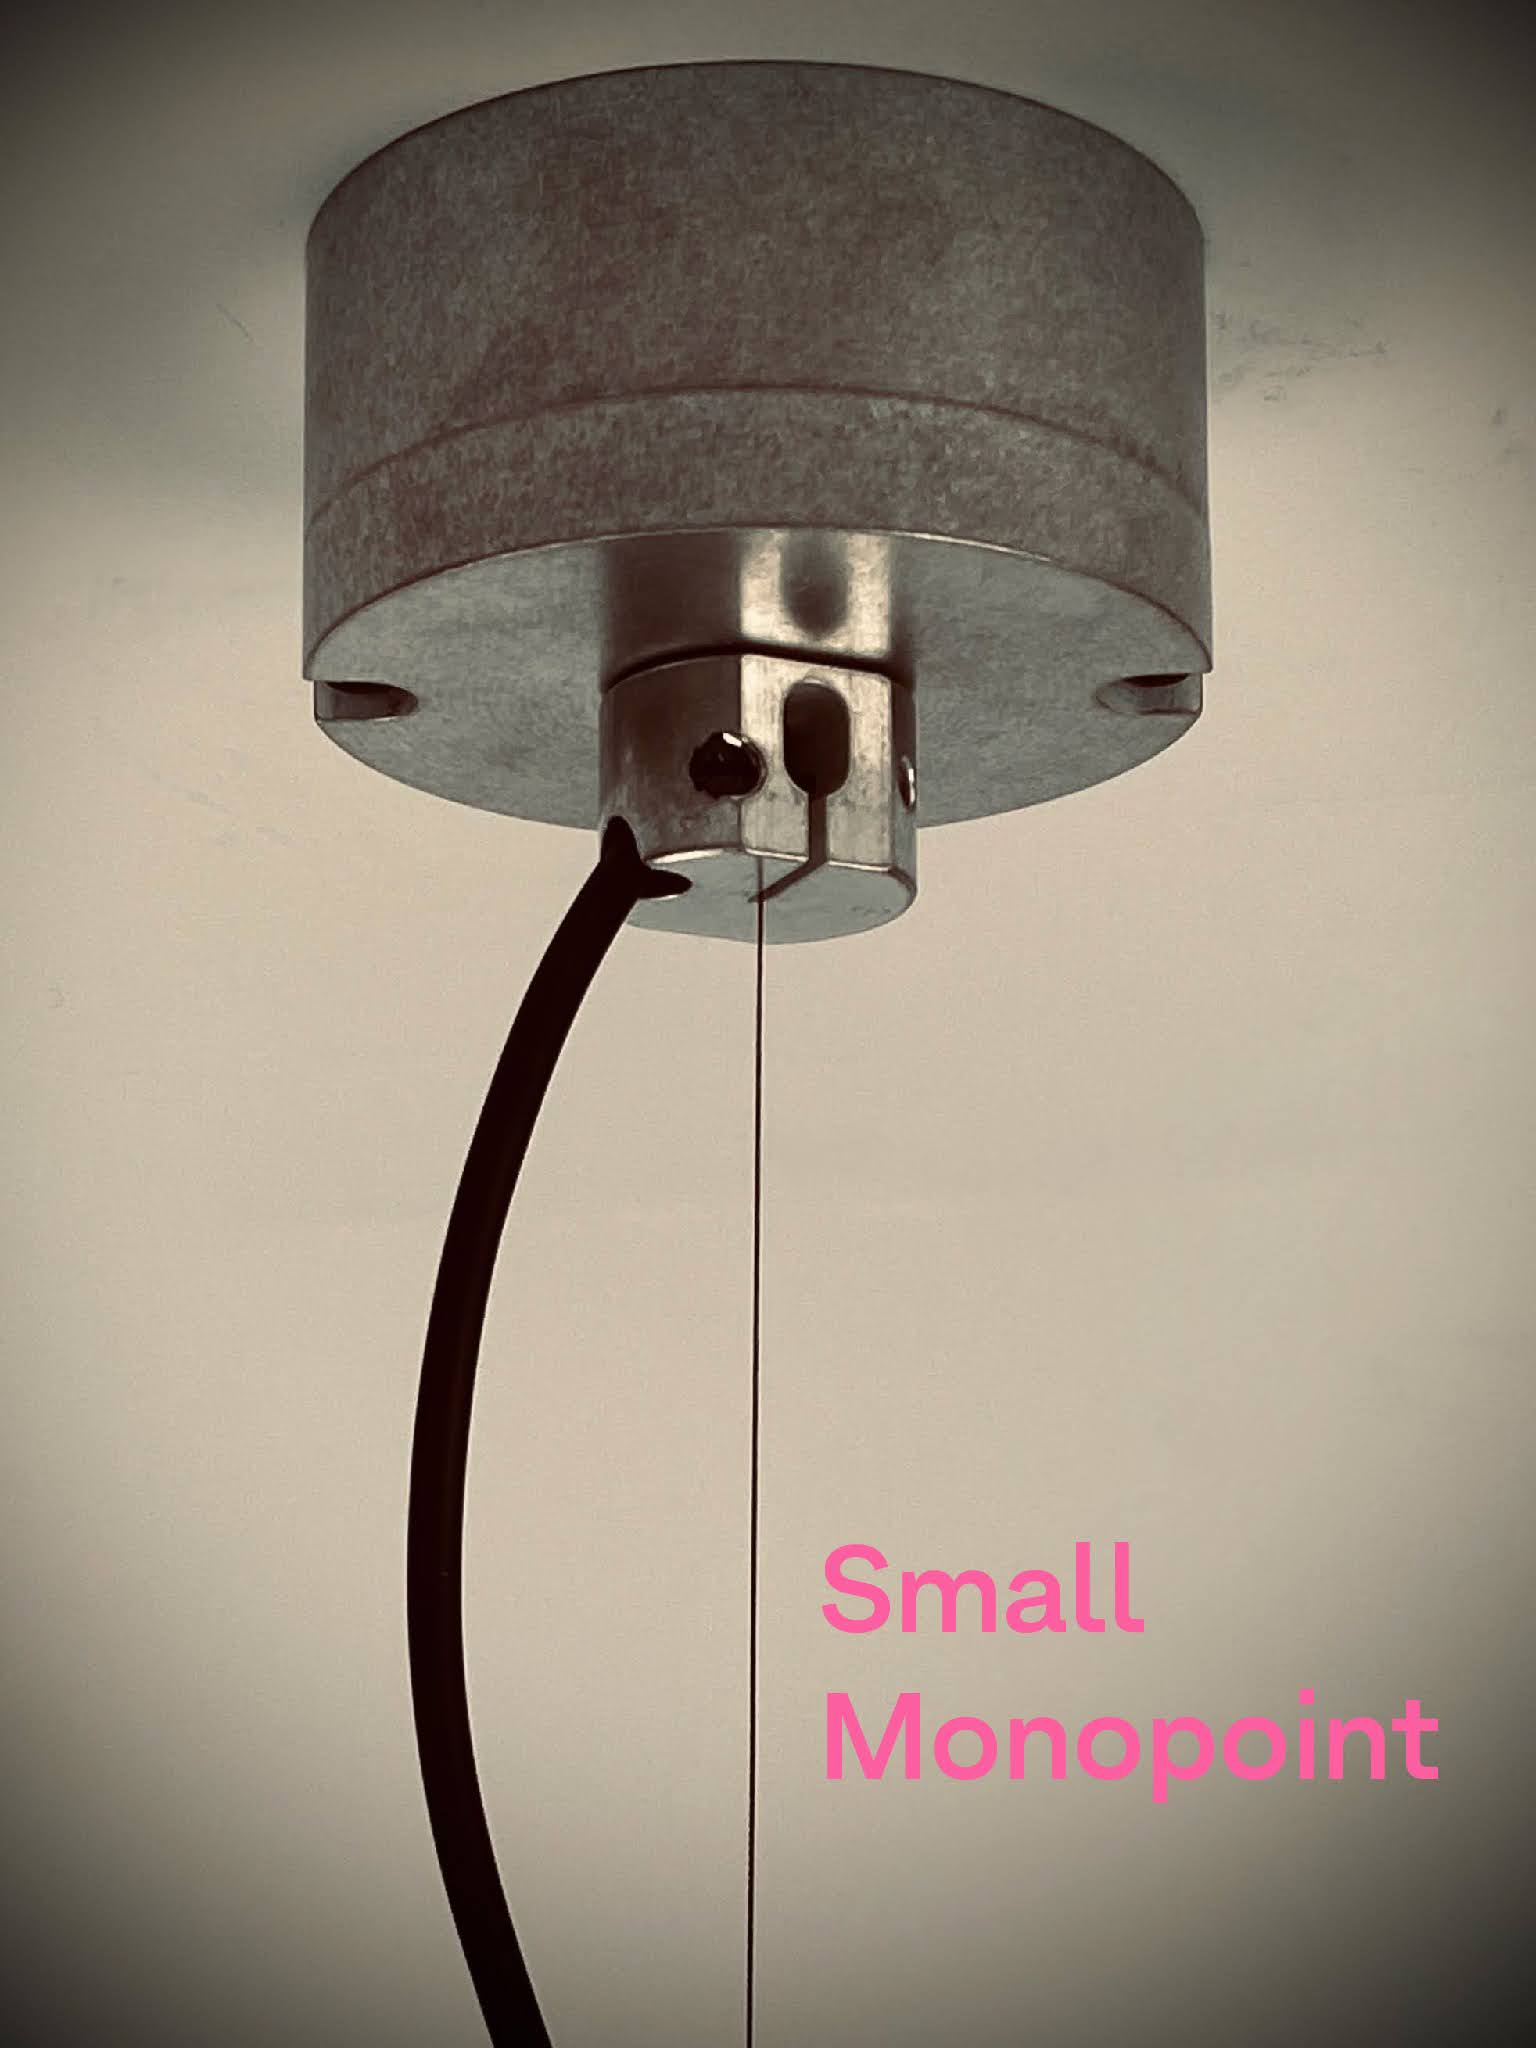 Installed small monopoint for a budget architectural pendant that was designed for circular economy